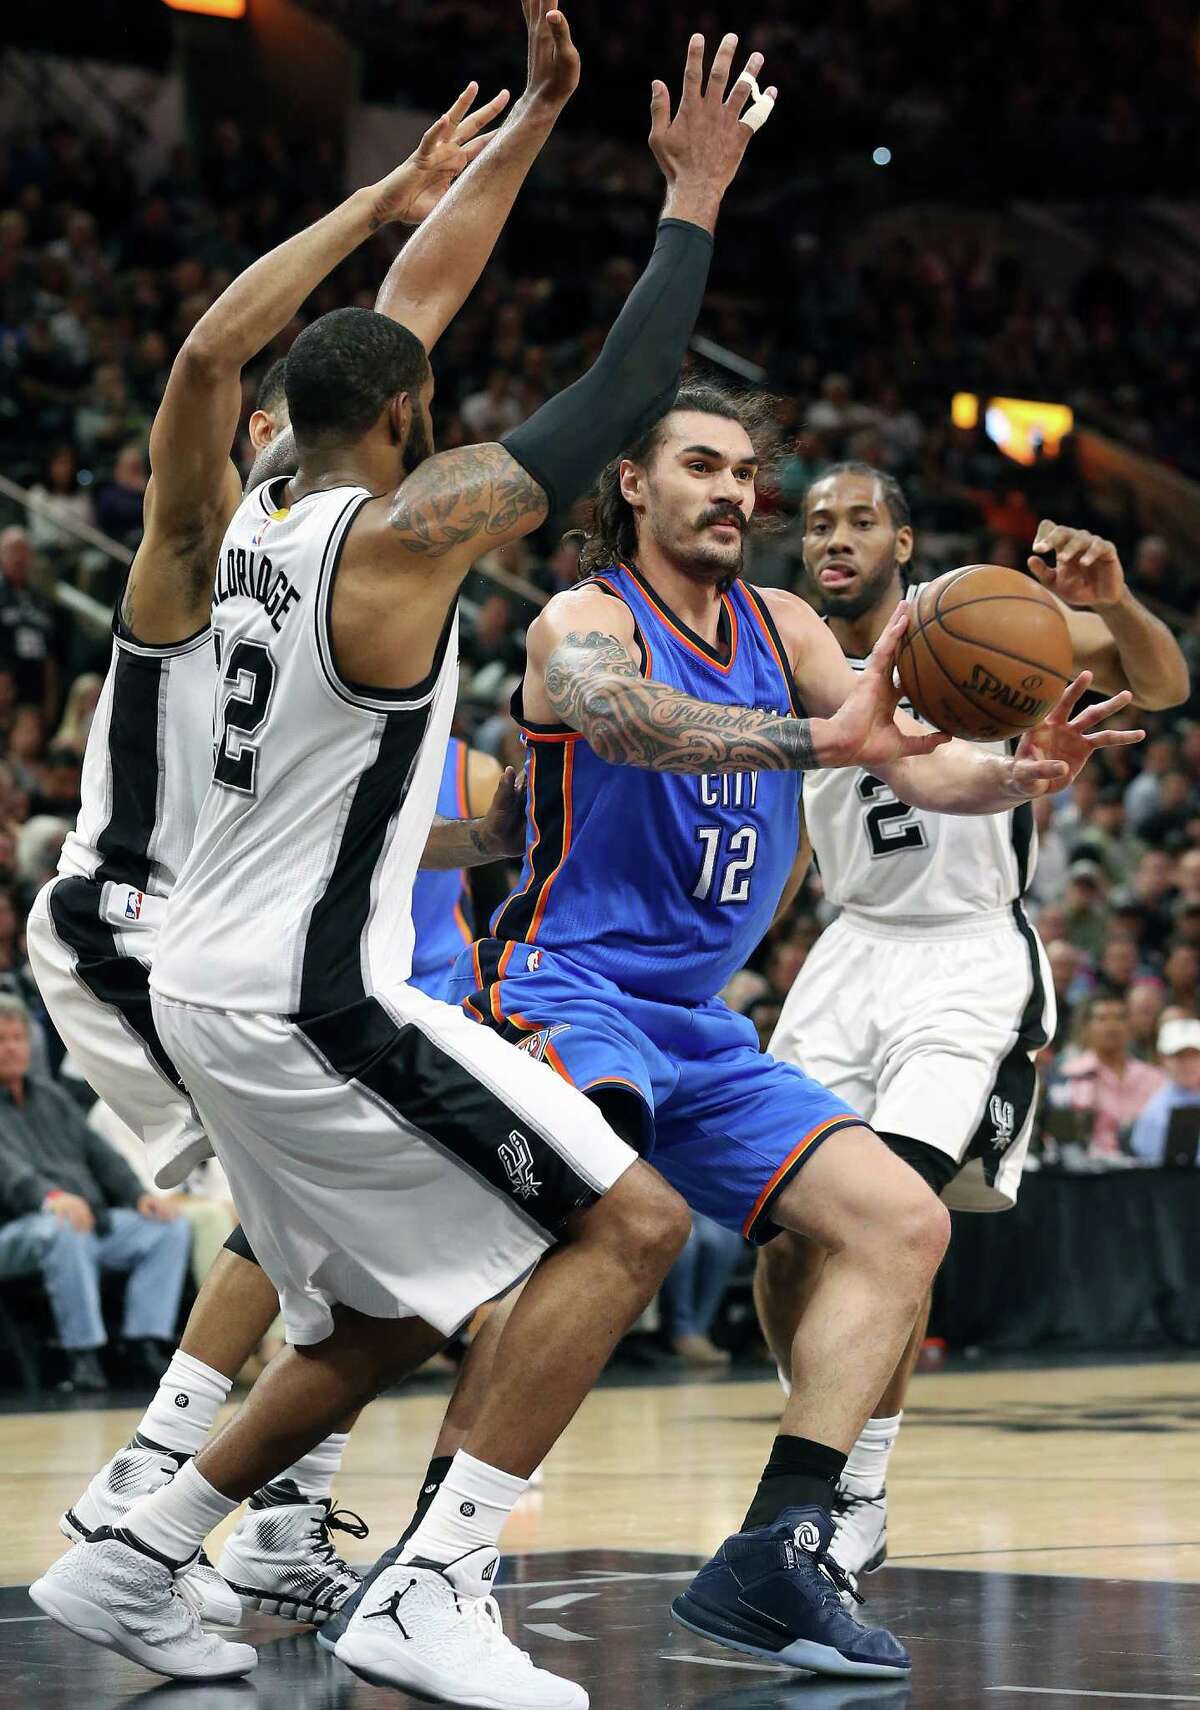 Steven Adams passes to the outside as the Spurs host the Thunder in game 2 of second round NBA playoff action at the AT&T Center on May 2, 2016.